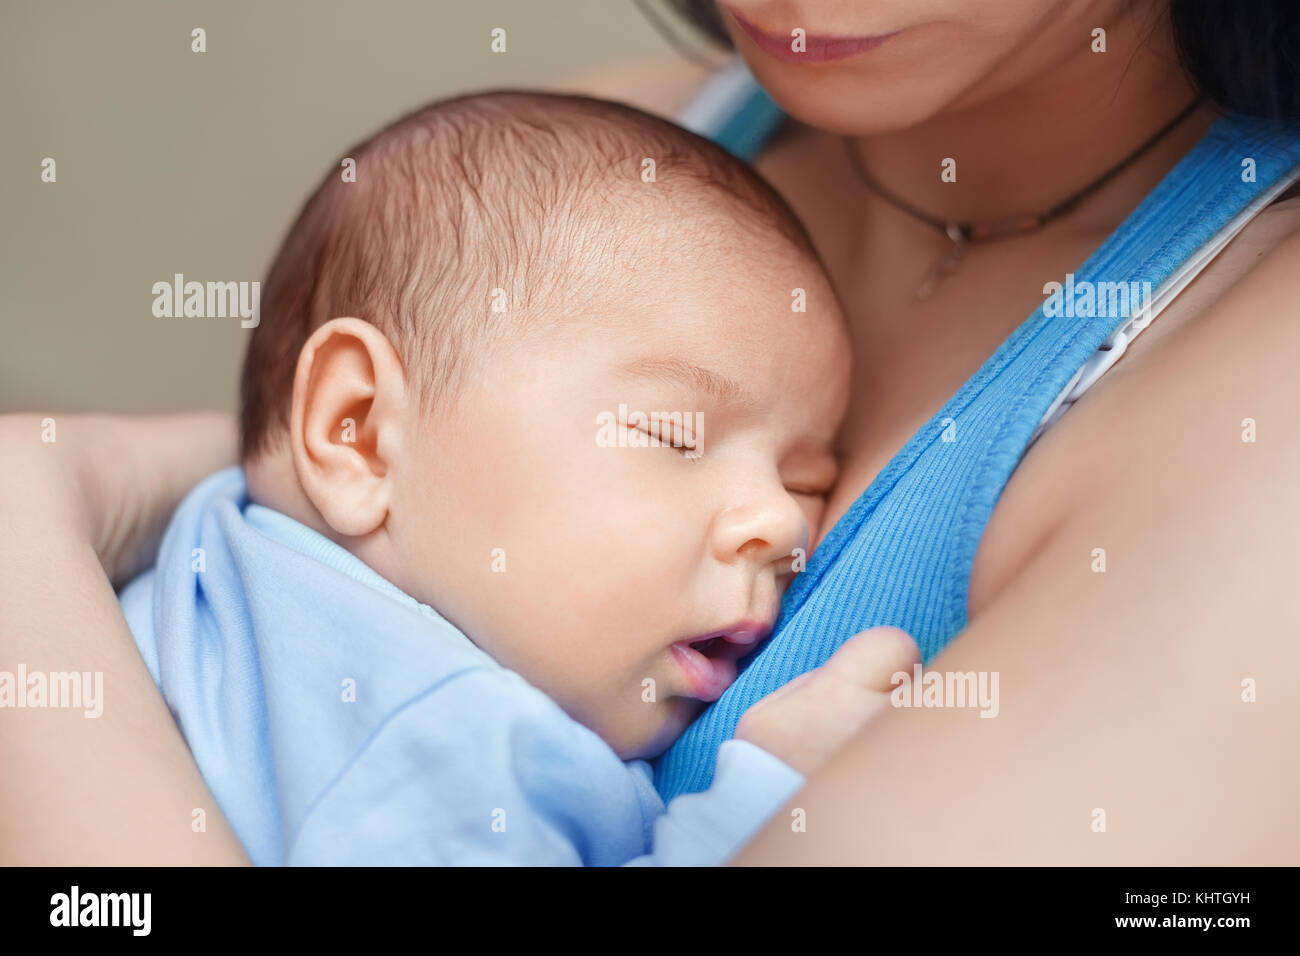 Mother holding newborn baby Banque D'Images